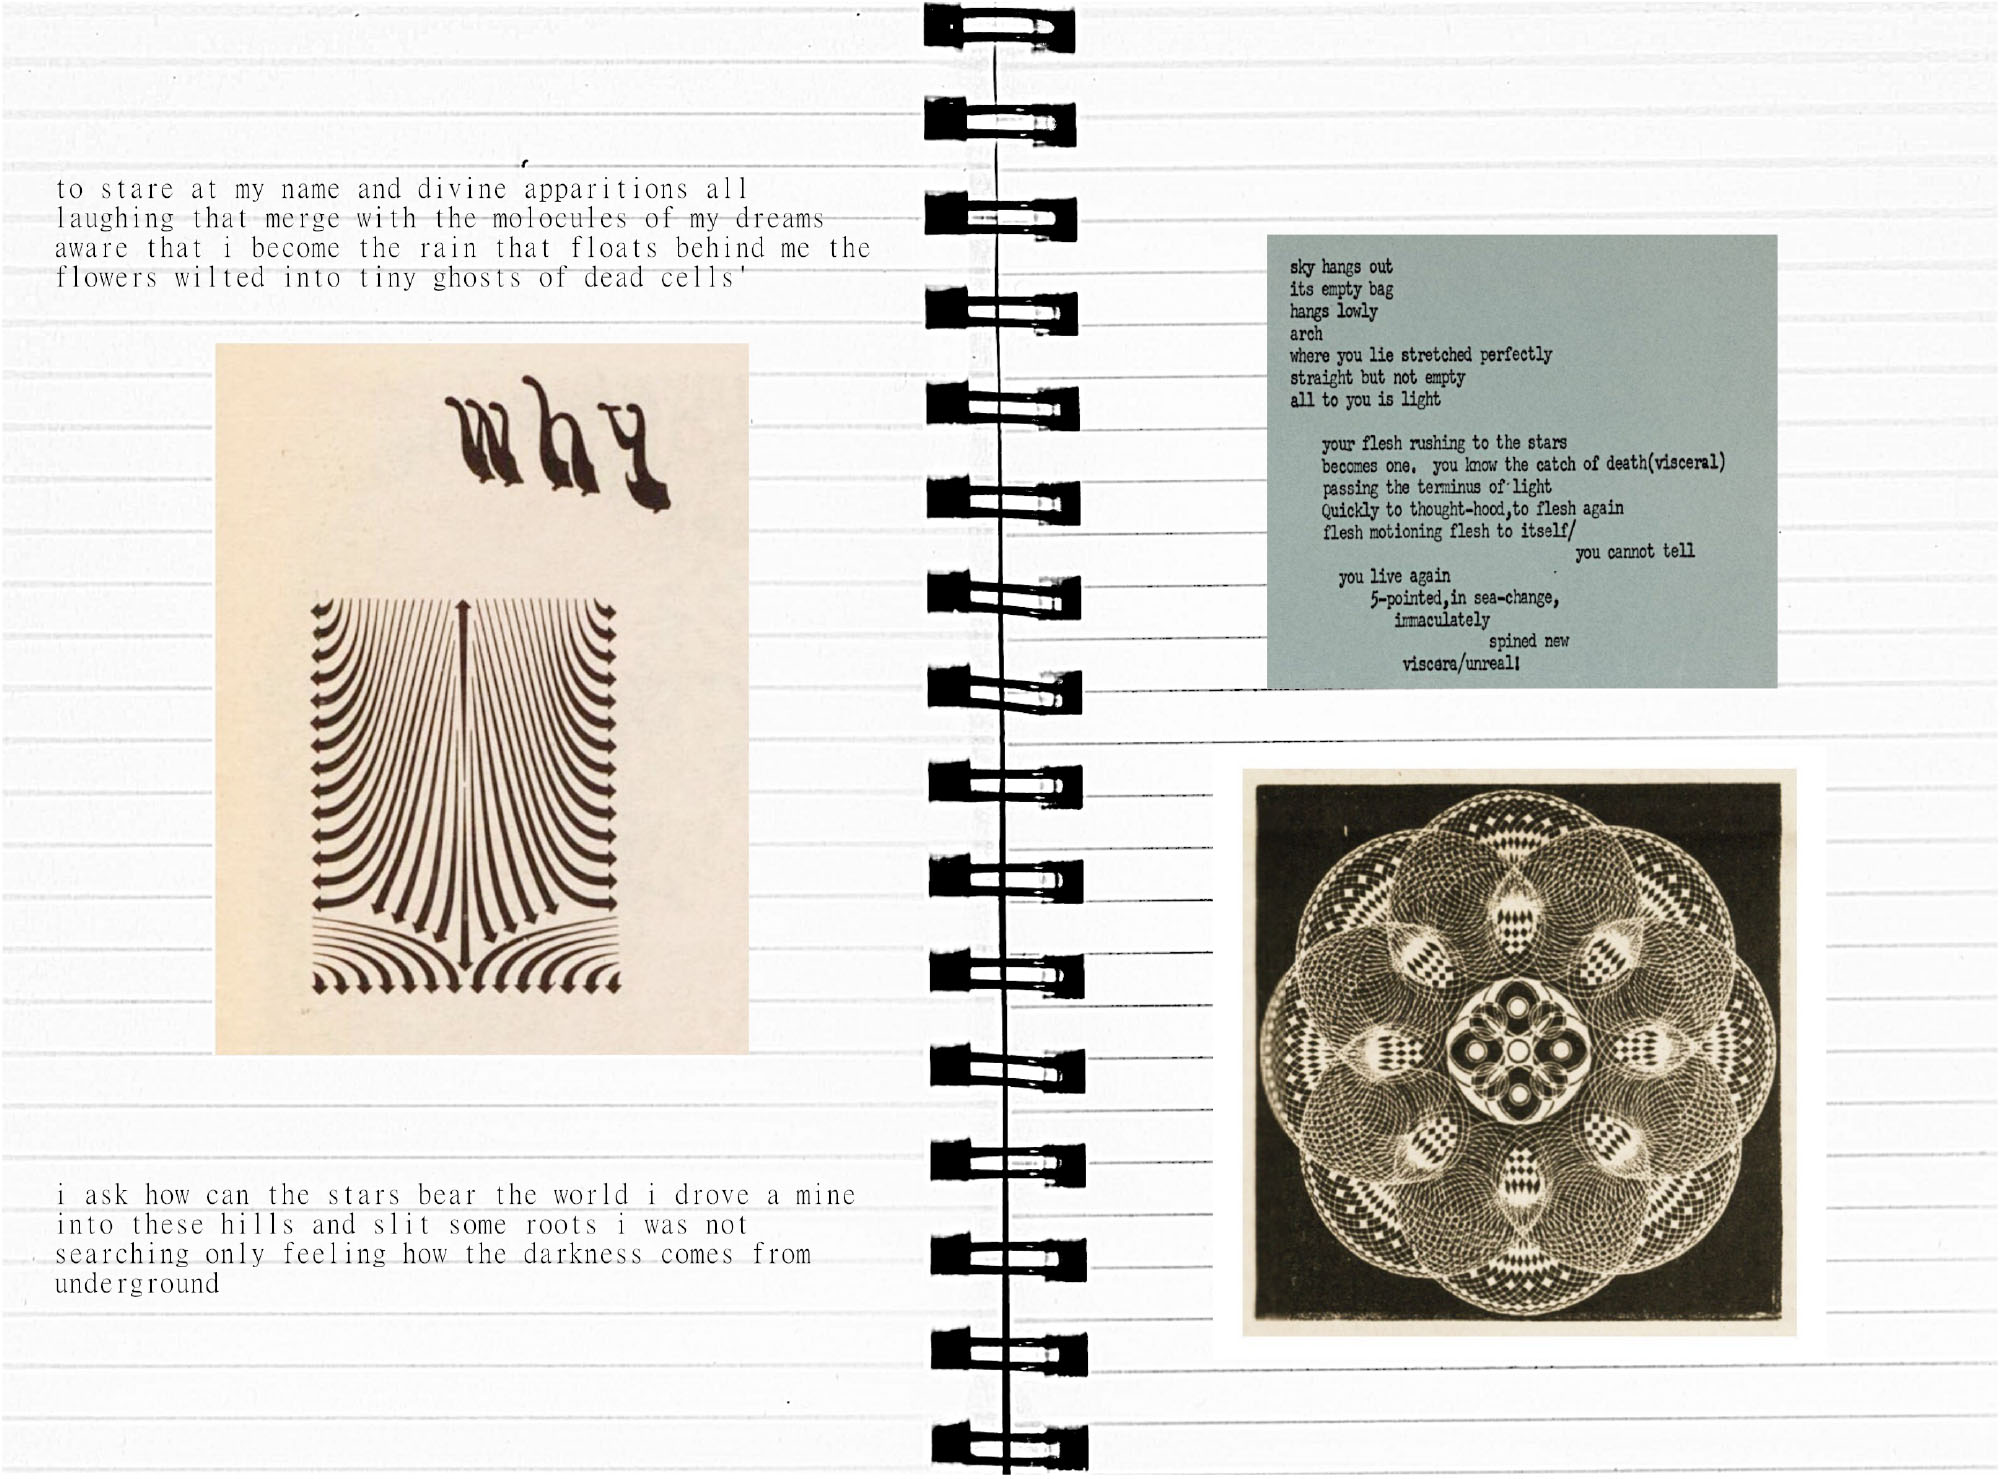 exmouth_scrapbook_notes_on_utopia_final_version-19